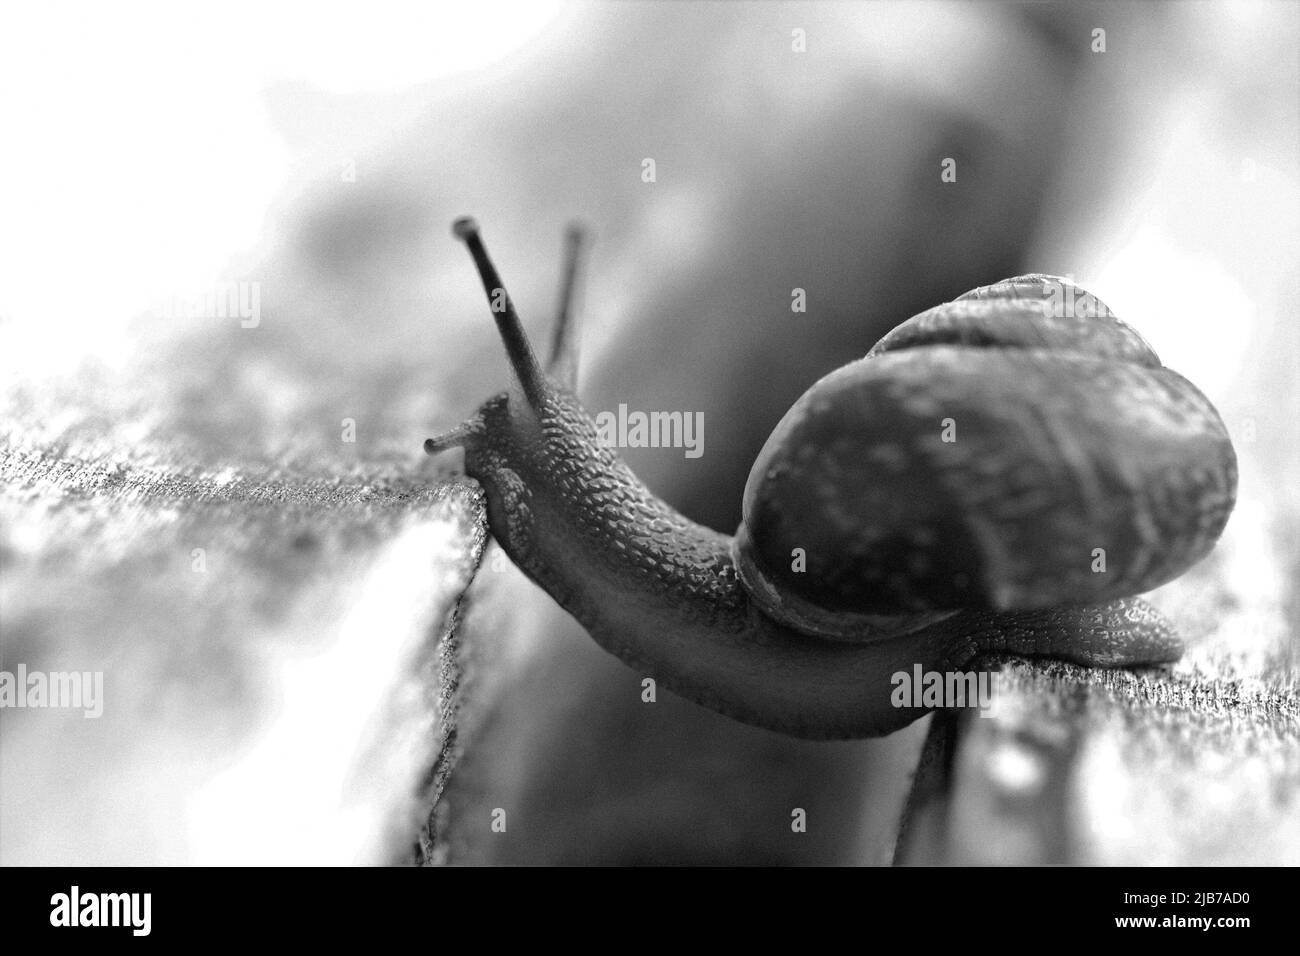 Snail on a wooden garden. The snail glides over the wet wood texture trying to climb from one board to another. Macro close-up of a blurred background Stock Photo